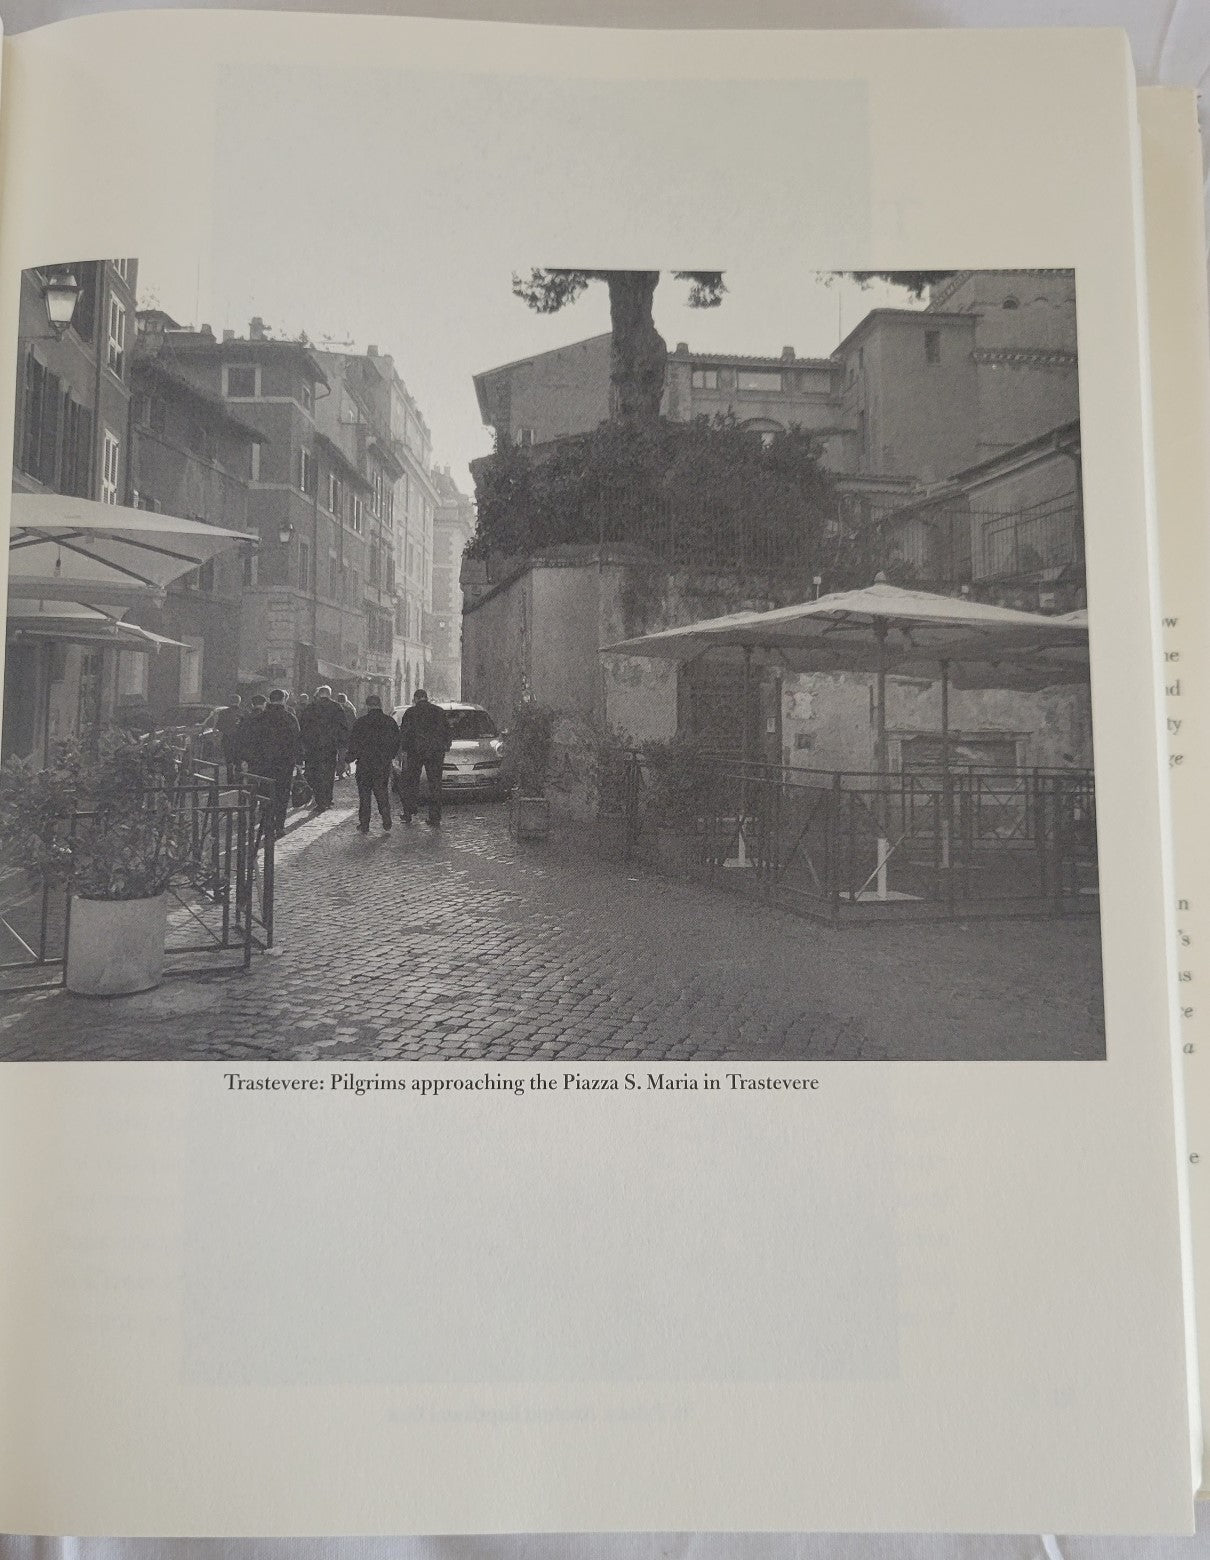 Used book for sale “Roman Pilgrimage: The Station Churches” by George Weigel with Elizabeth Lev and Stephen Weigel.  Inside photograph